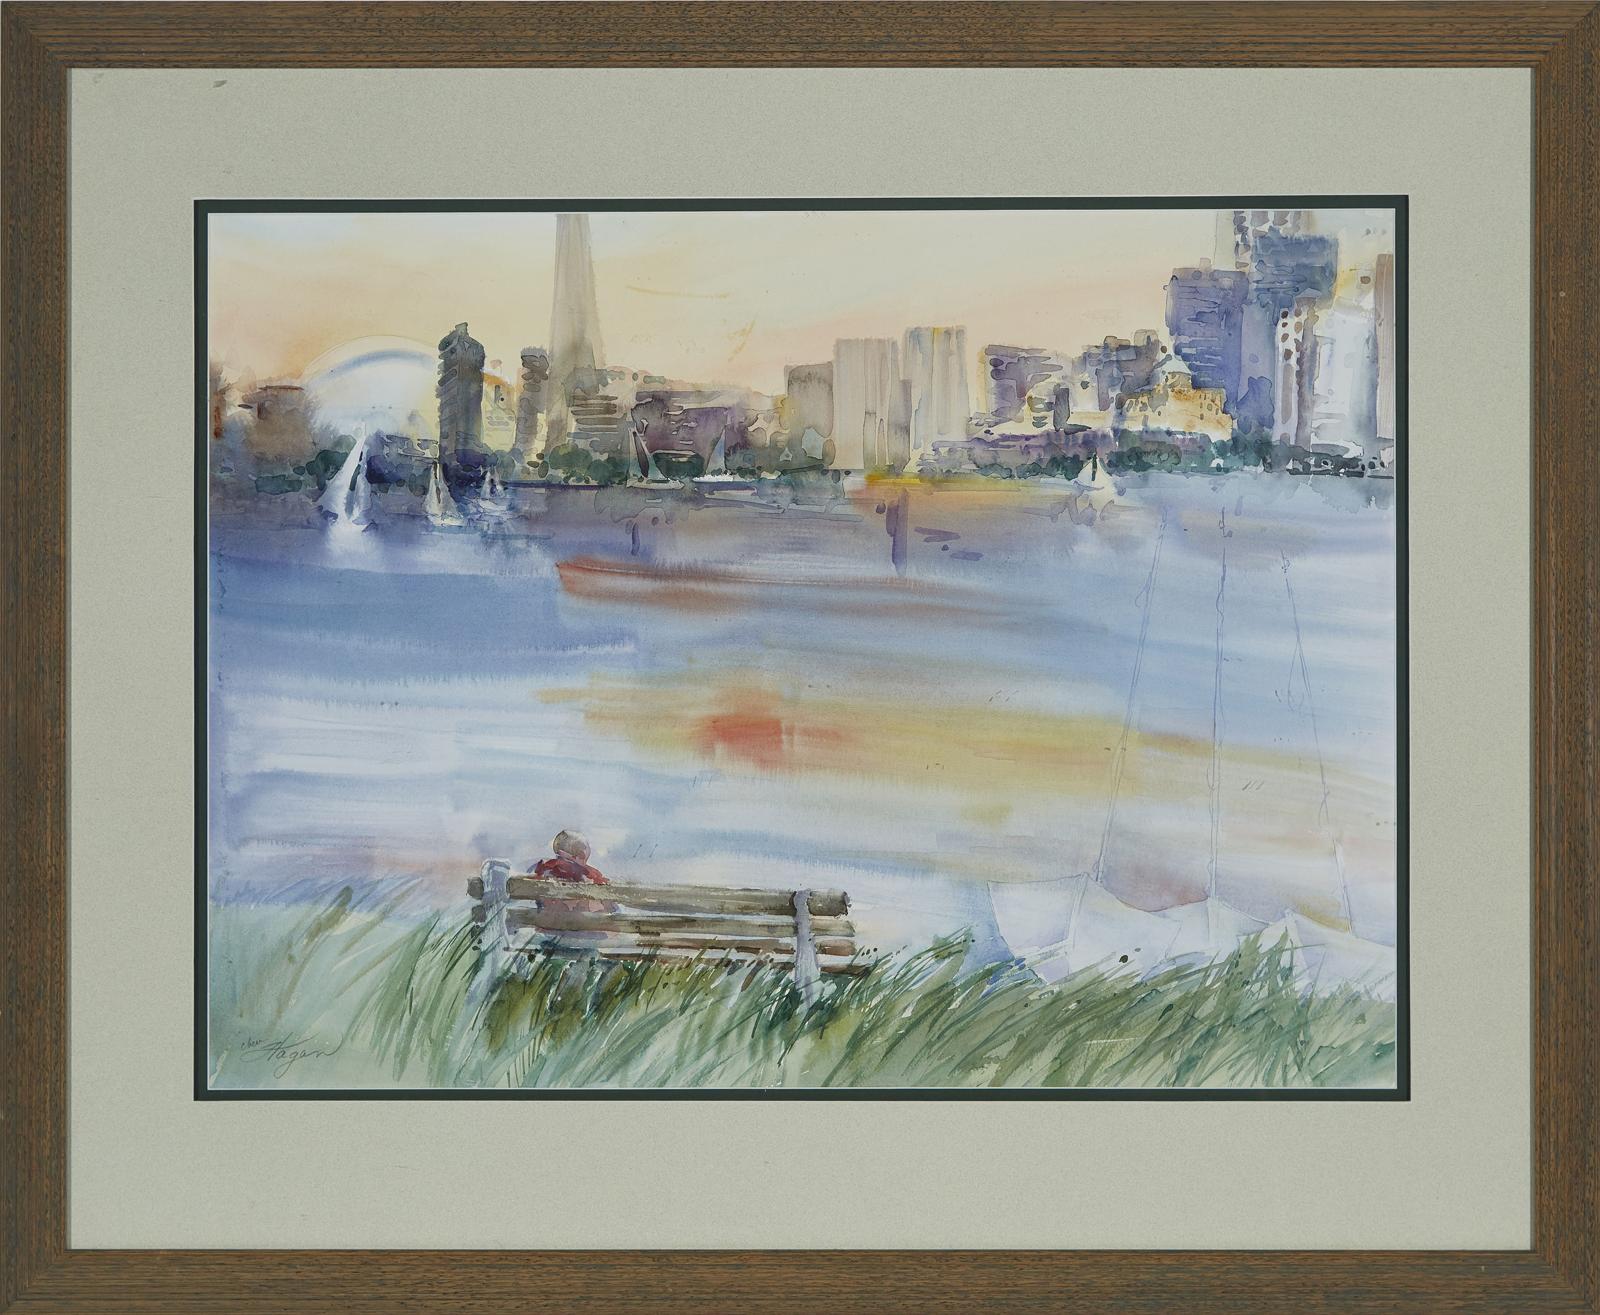 Bev Rodin formerly Hagan - Untitled (View Of Toronto From Island)